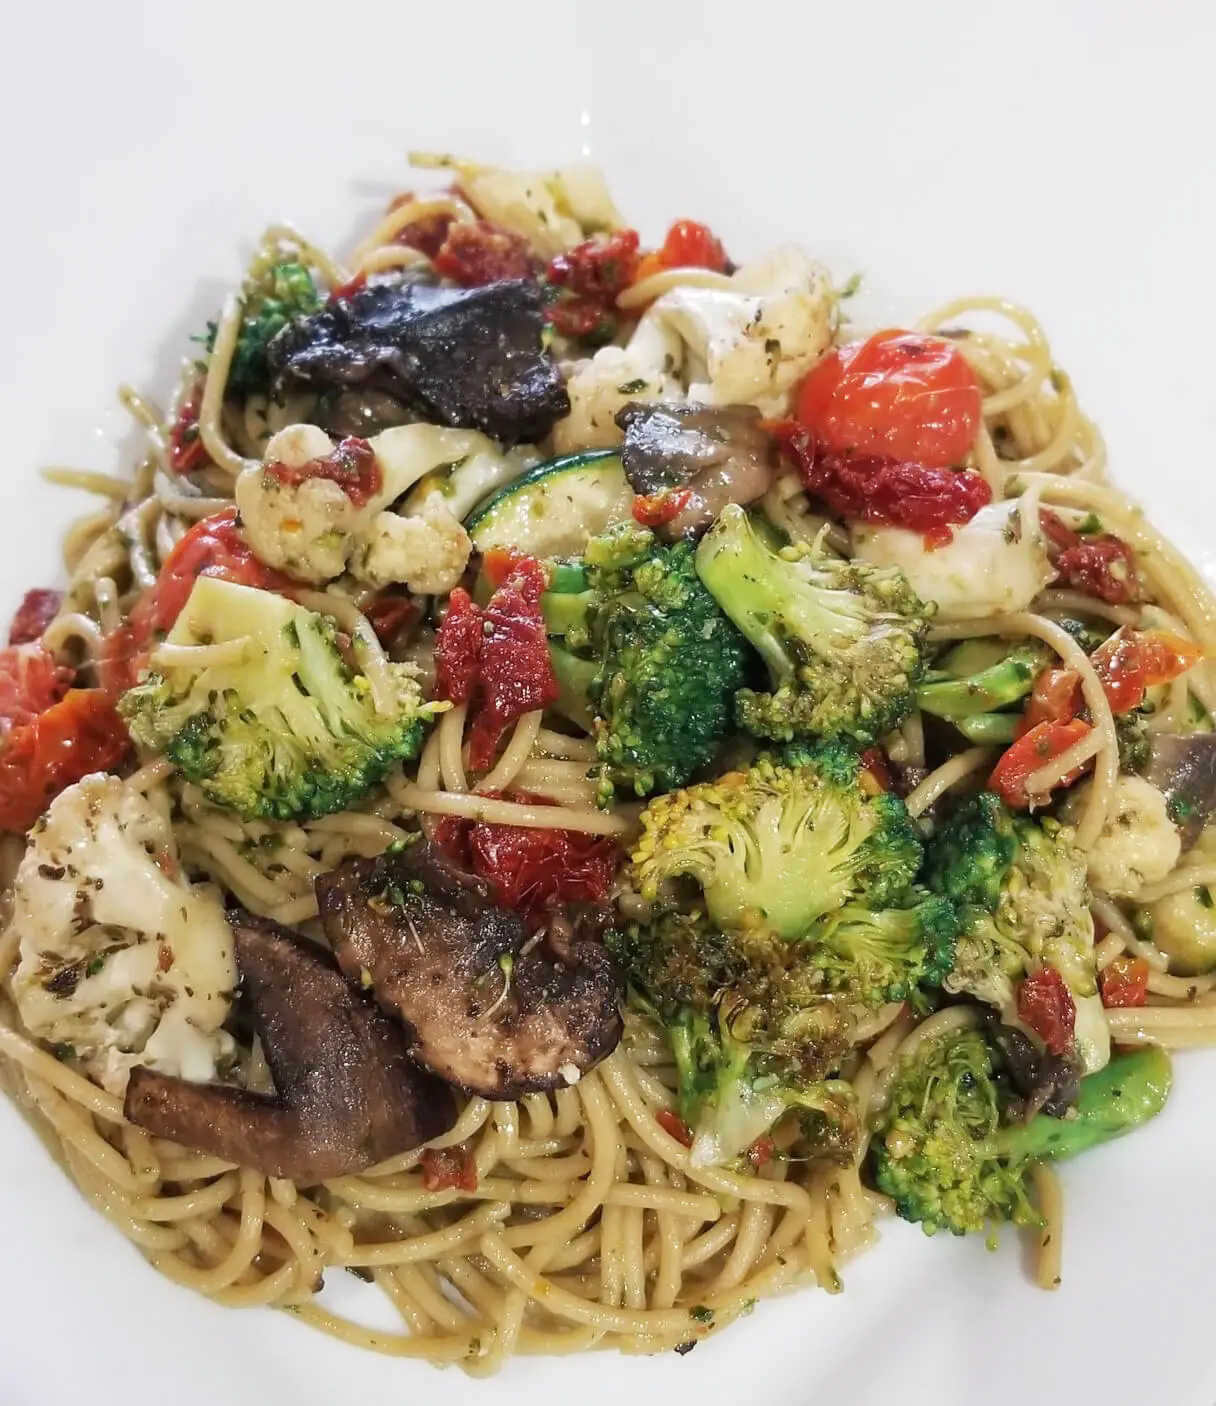 A dish of pasta adorned with broccoli and mushrooms, creating a delectable and nutritious meal